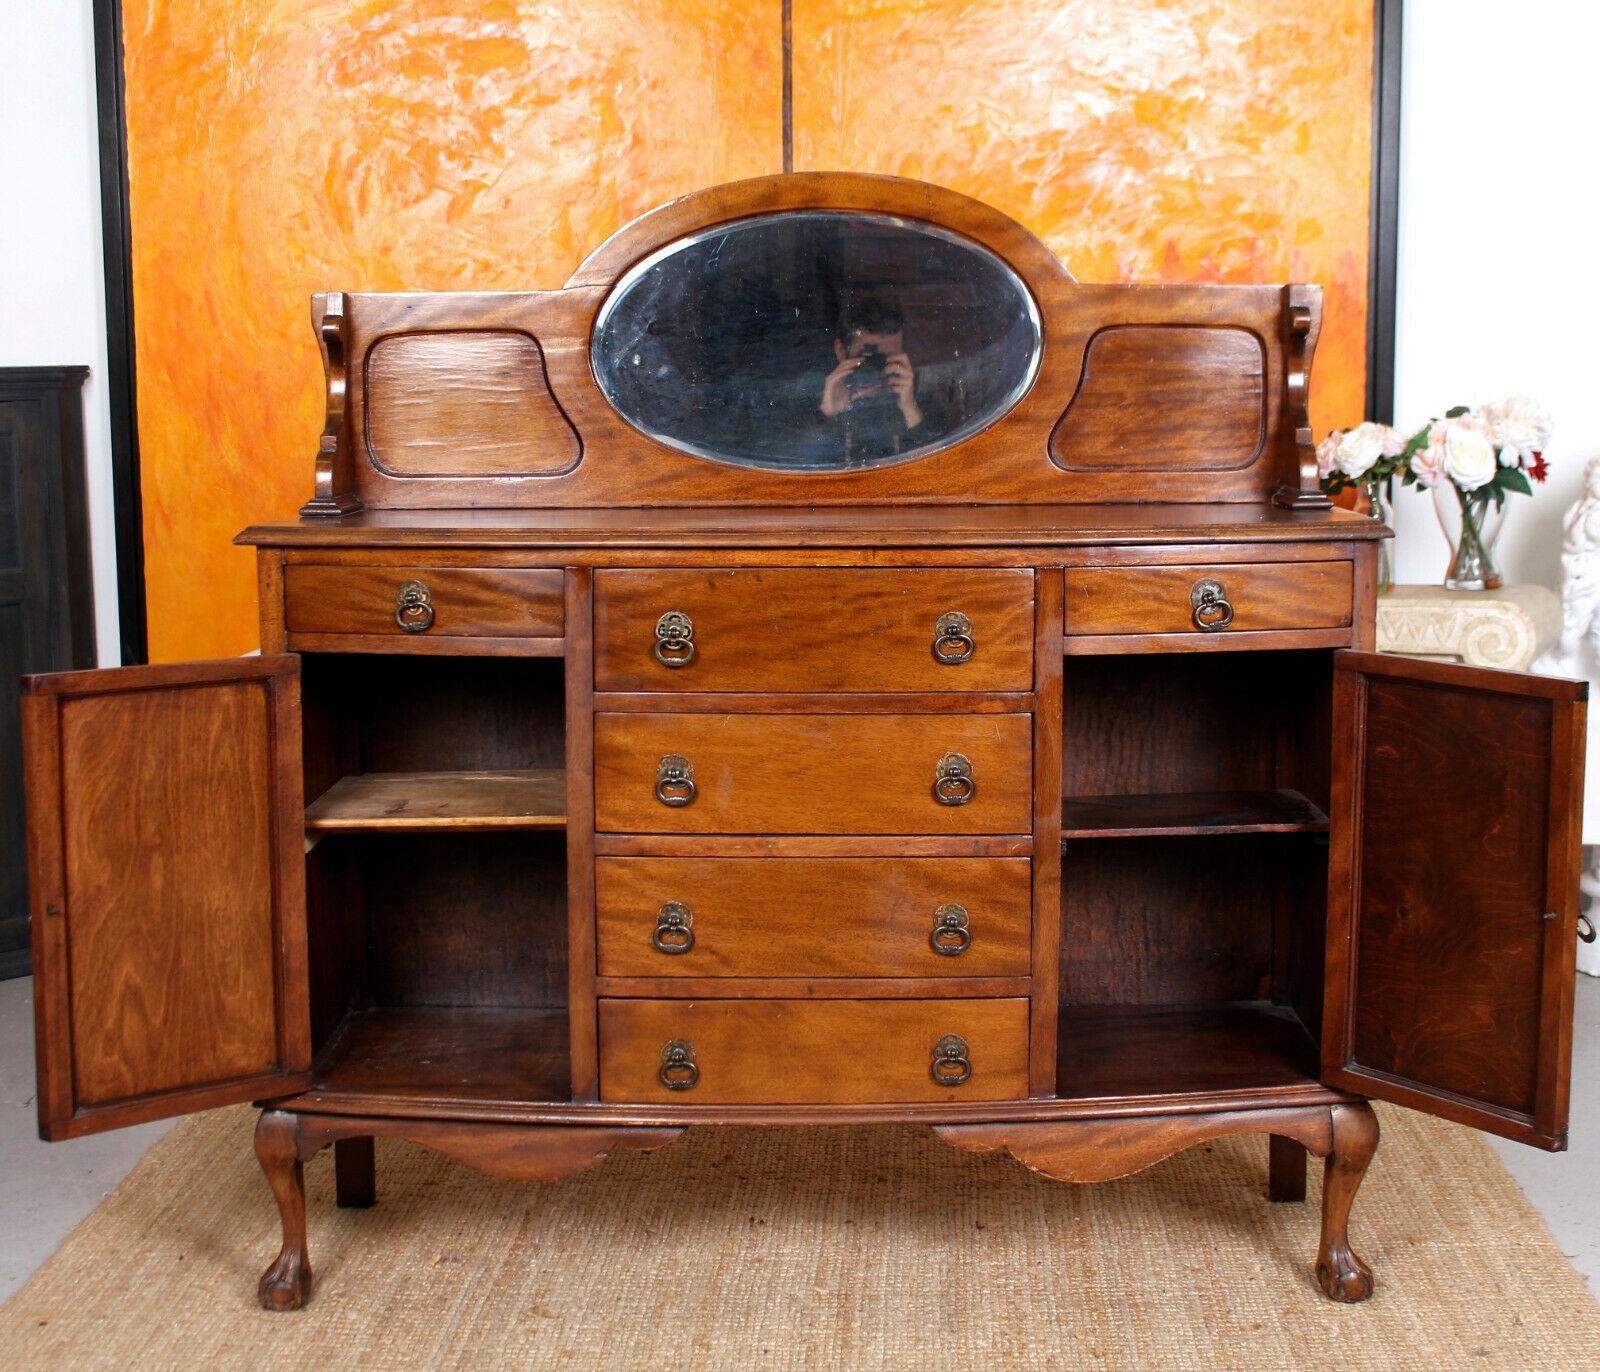 A fine quality 19th century sideboard in the Arts & Crafts manner.
The mahogany boasting a well figured grain and rich patina.
The carved upstand above the rectangular top with carved edges and beveled mirror above a column of four drawers flanked